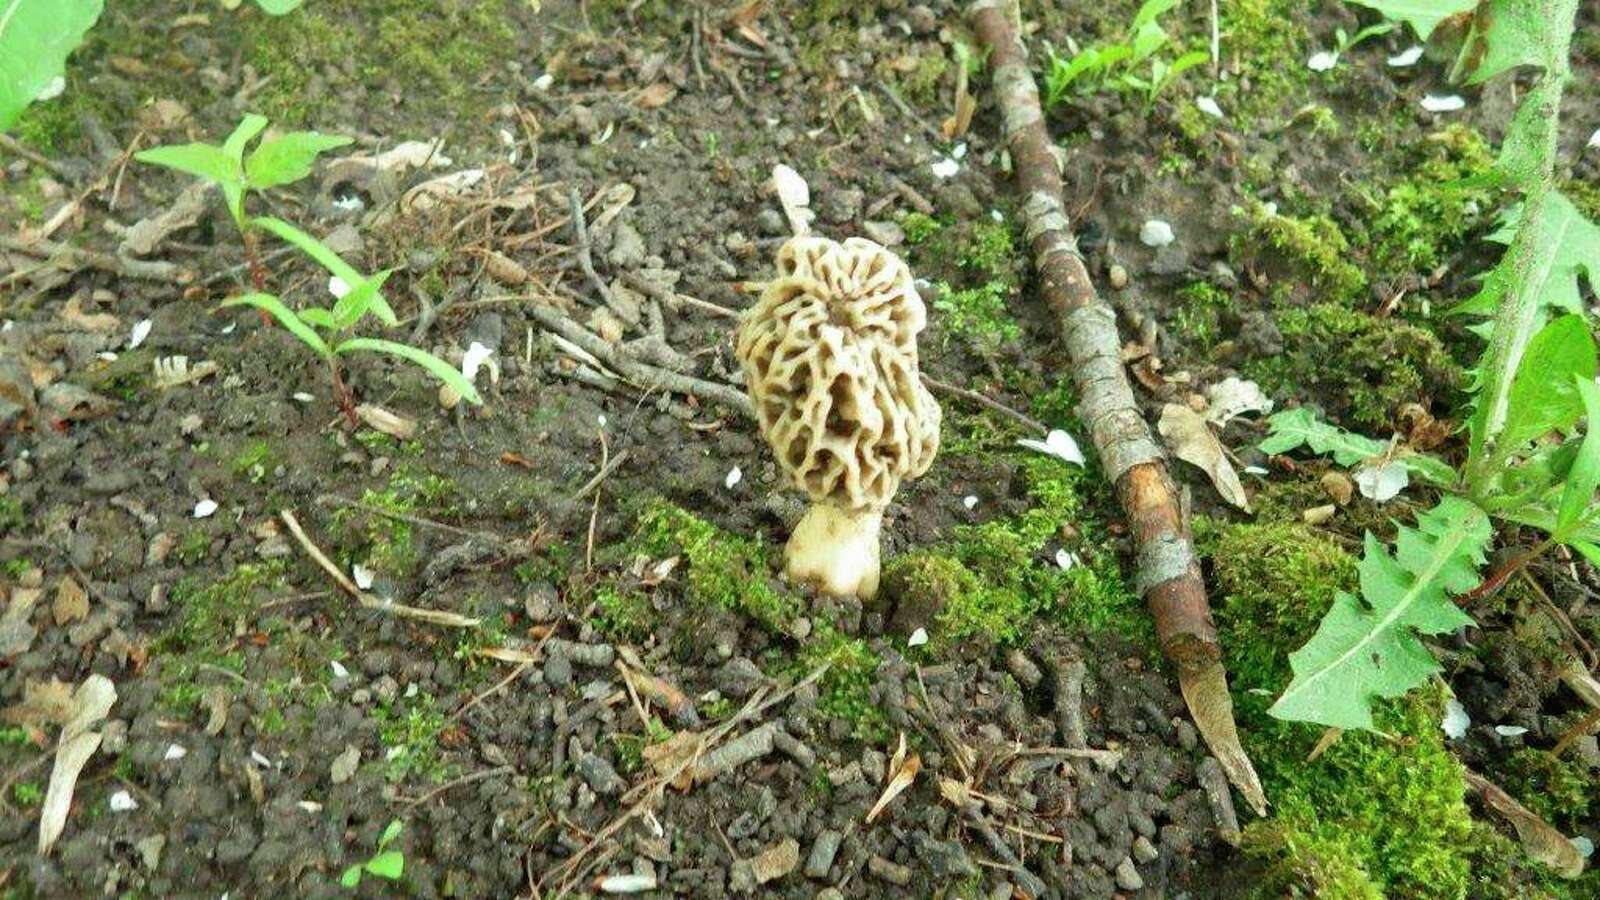 5 things to know about morel mushroom hunting